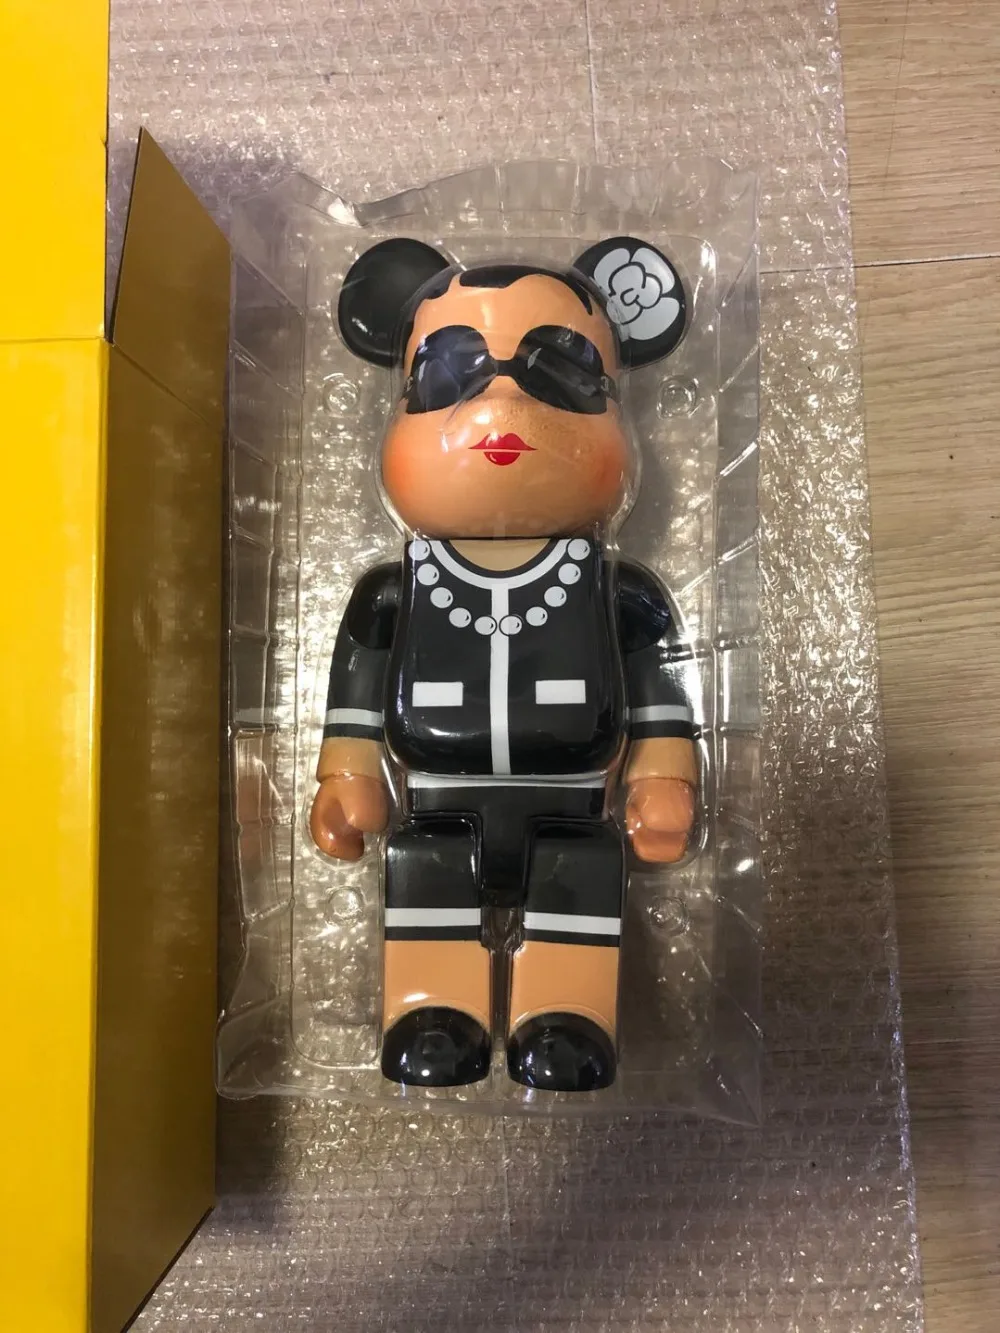 Bearbrick Banksy Balloon Girl Building Block Bear 400% 28cm Fashion Doll  Violence Bear Doll Ornament Gifts For Valentine's Day